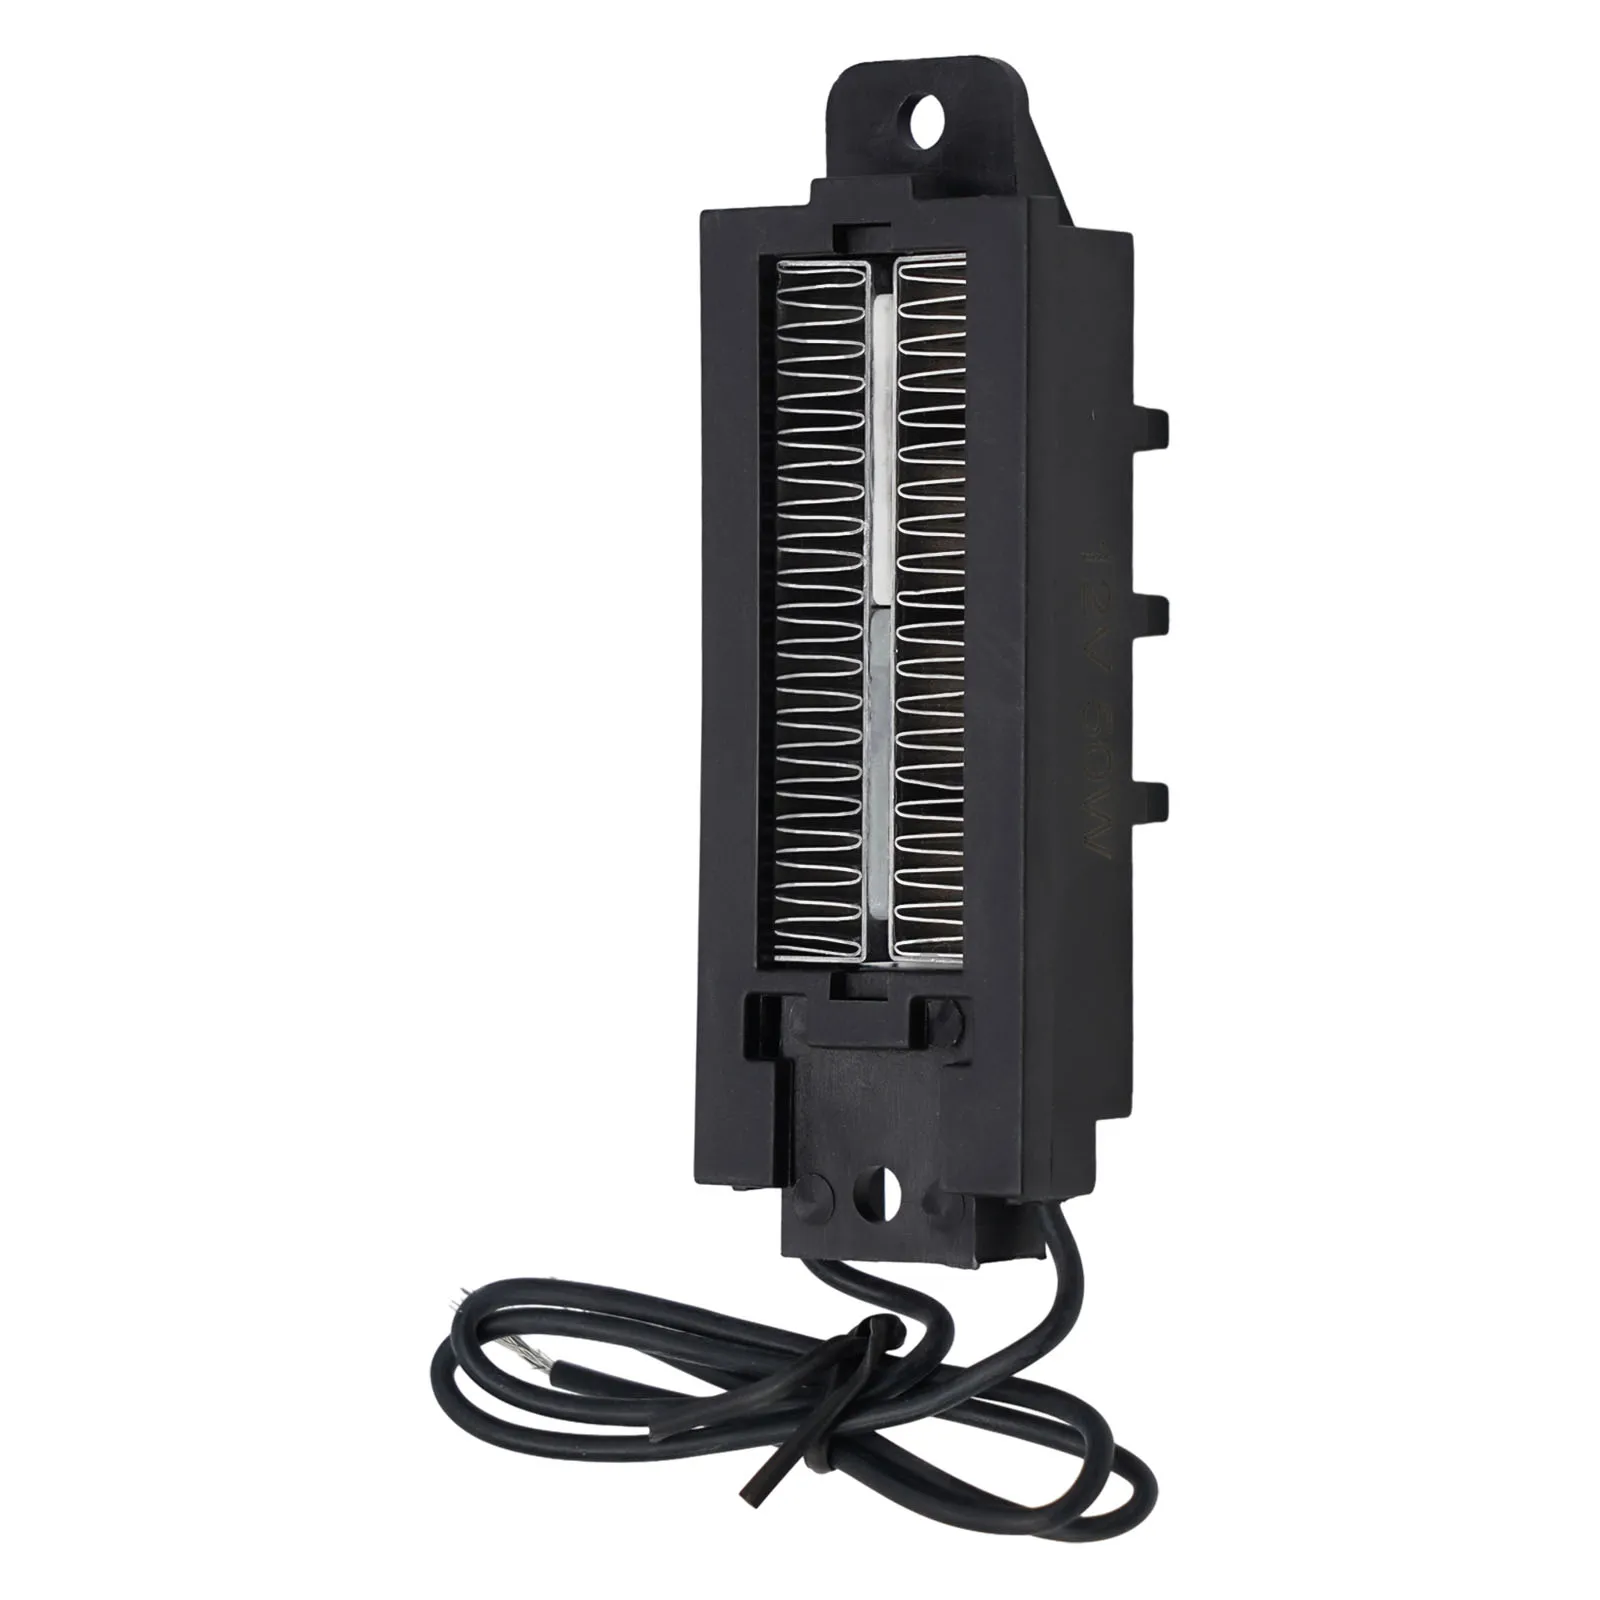 

1pcs 50W 12V Heater DC Air With PTC Ceramic And Aluminum Air Heater Black 95*31*25mm / 3.7*1.2*1inch